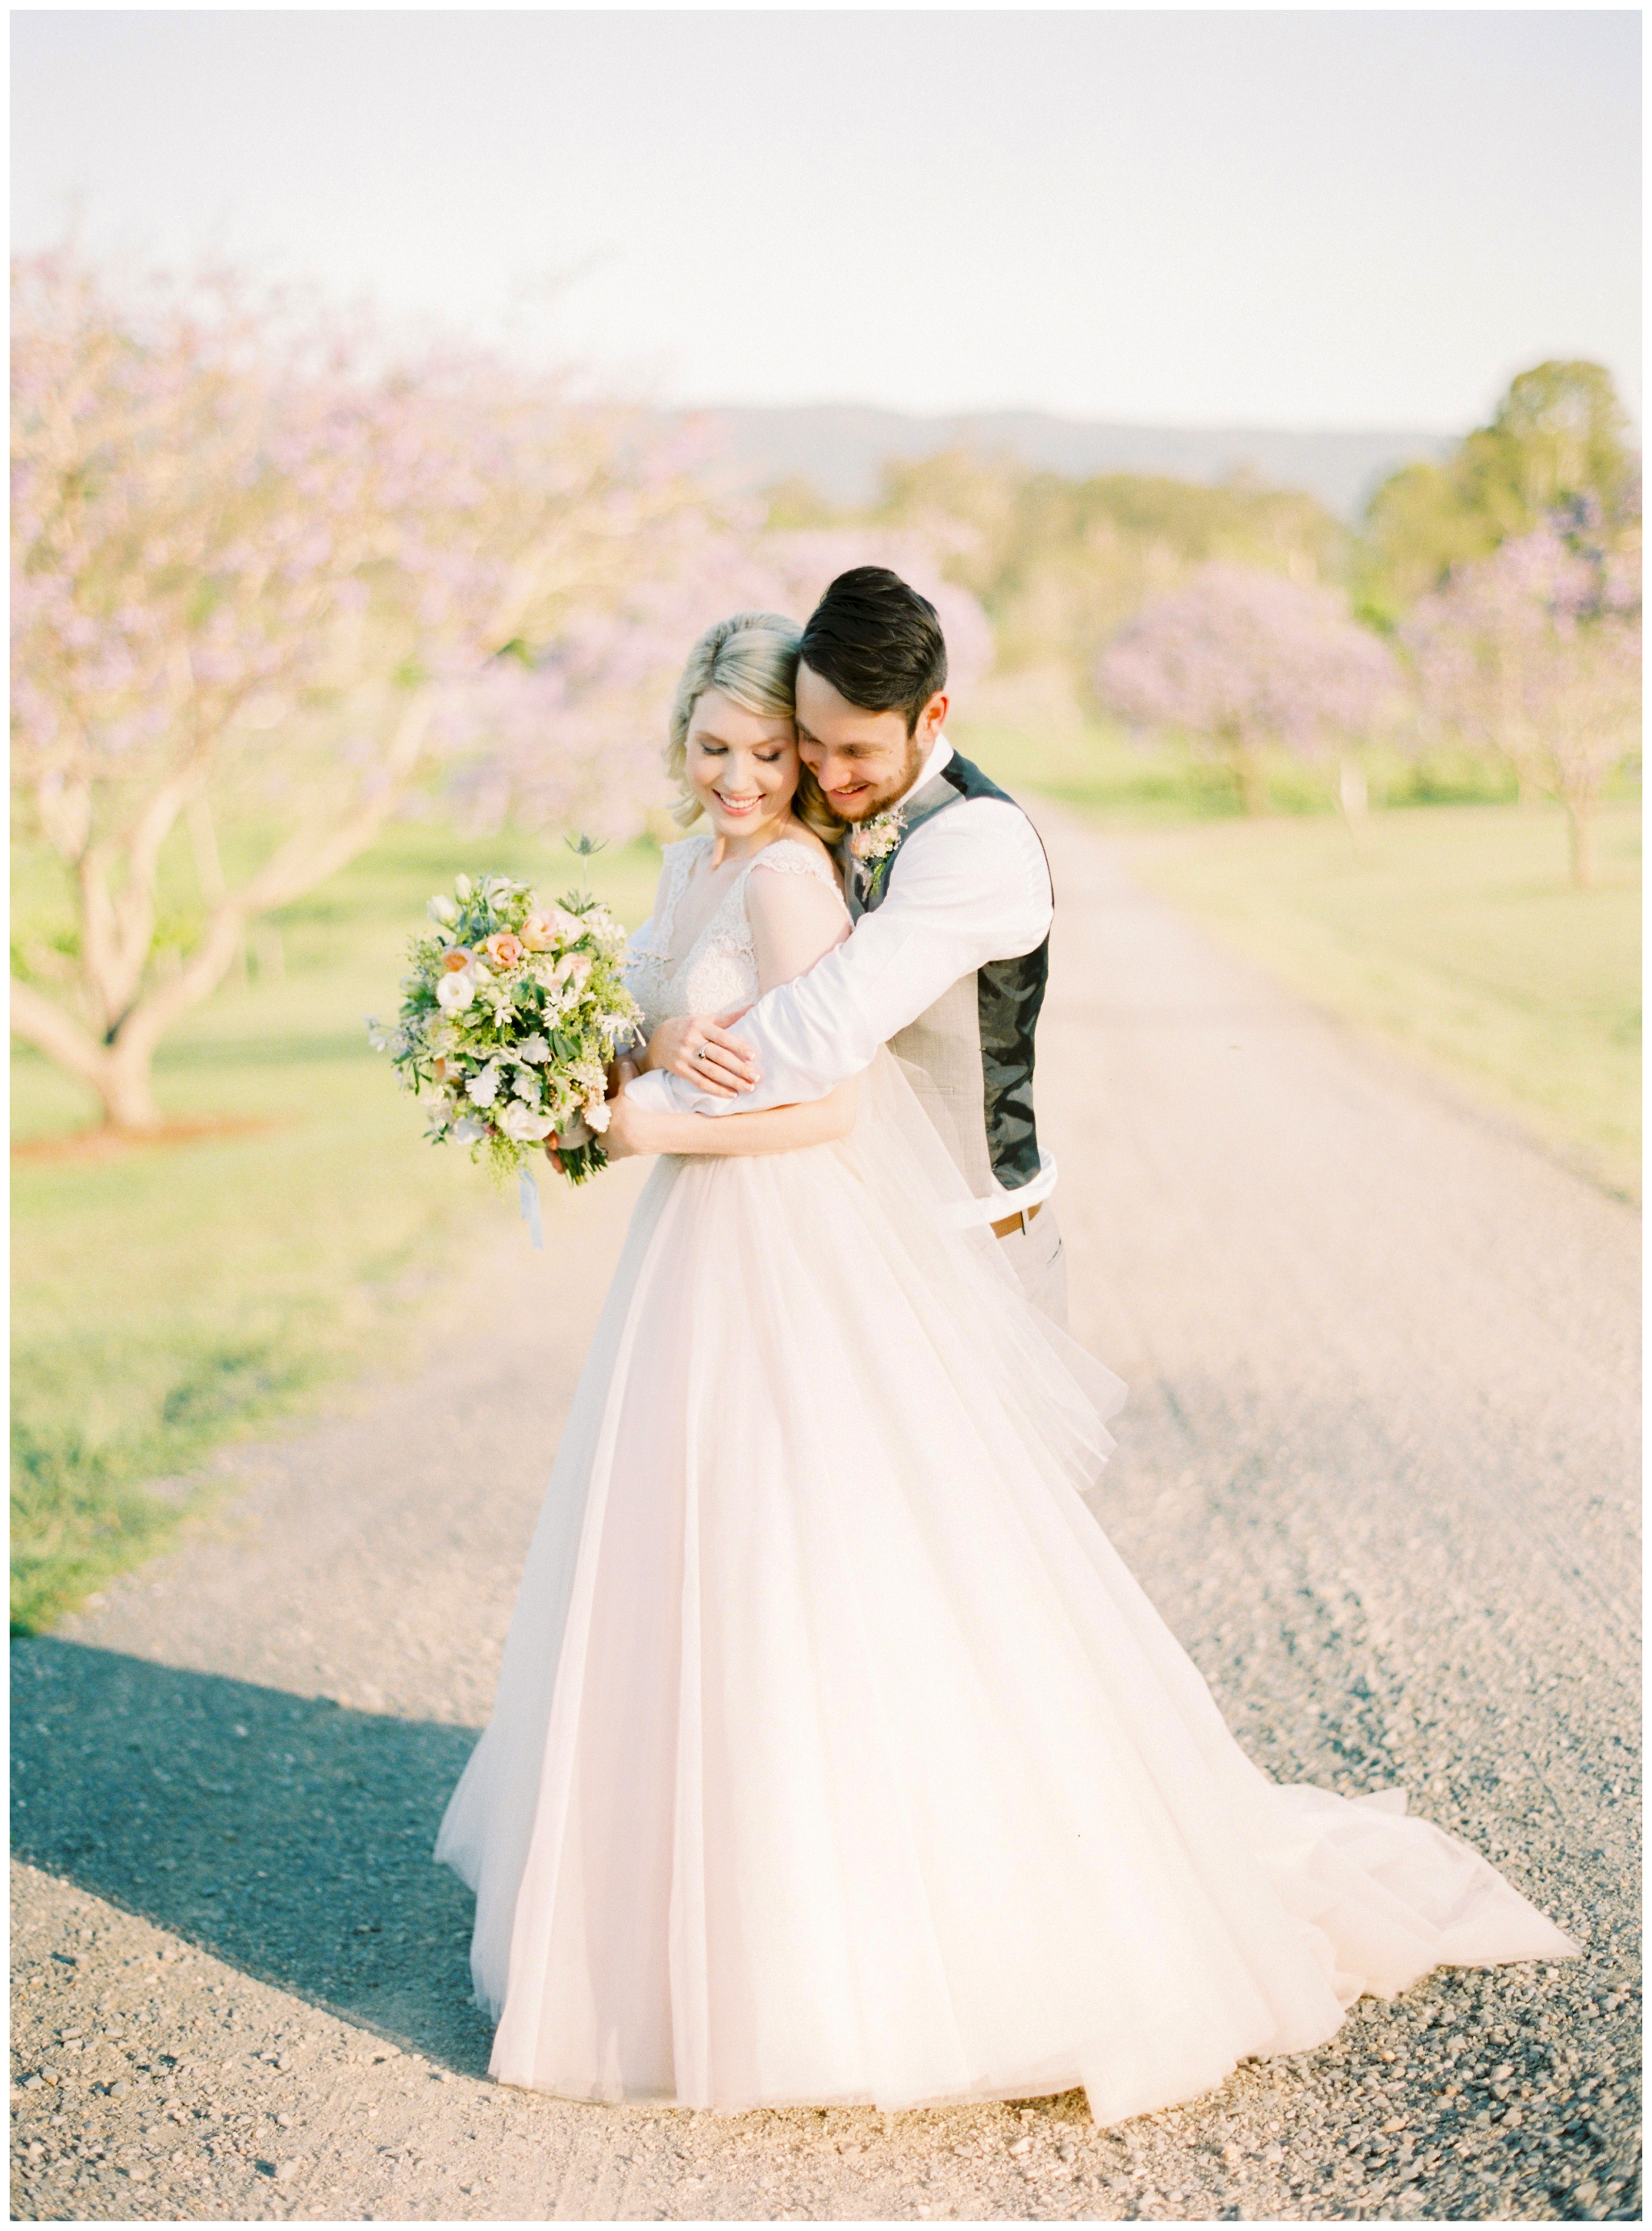 Tegan and Alex Wedding at Albert River Wines by Casey Jane Photography 56